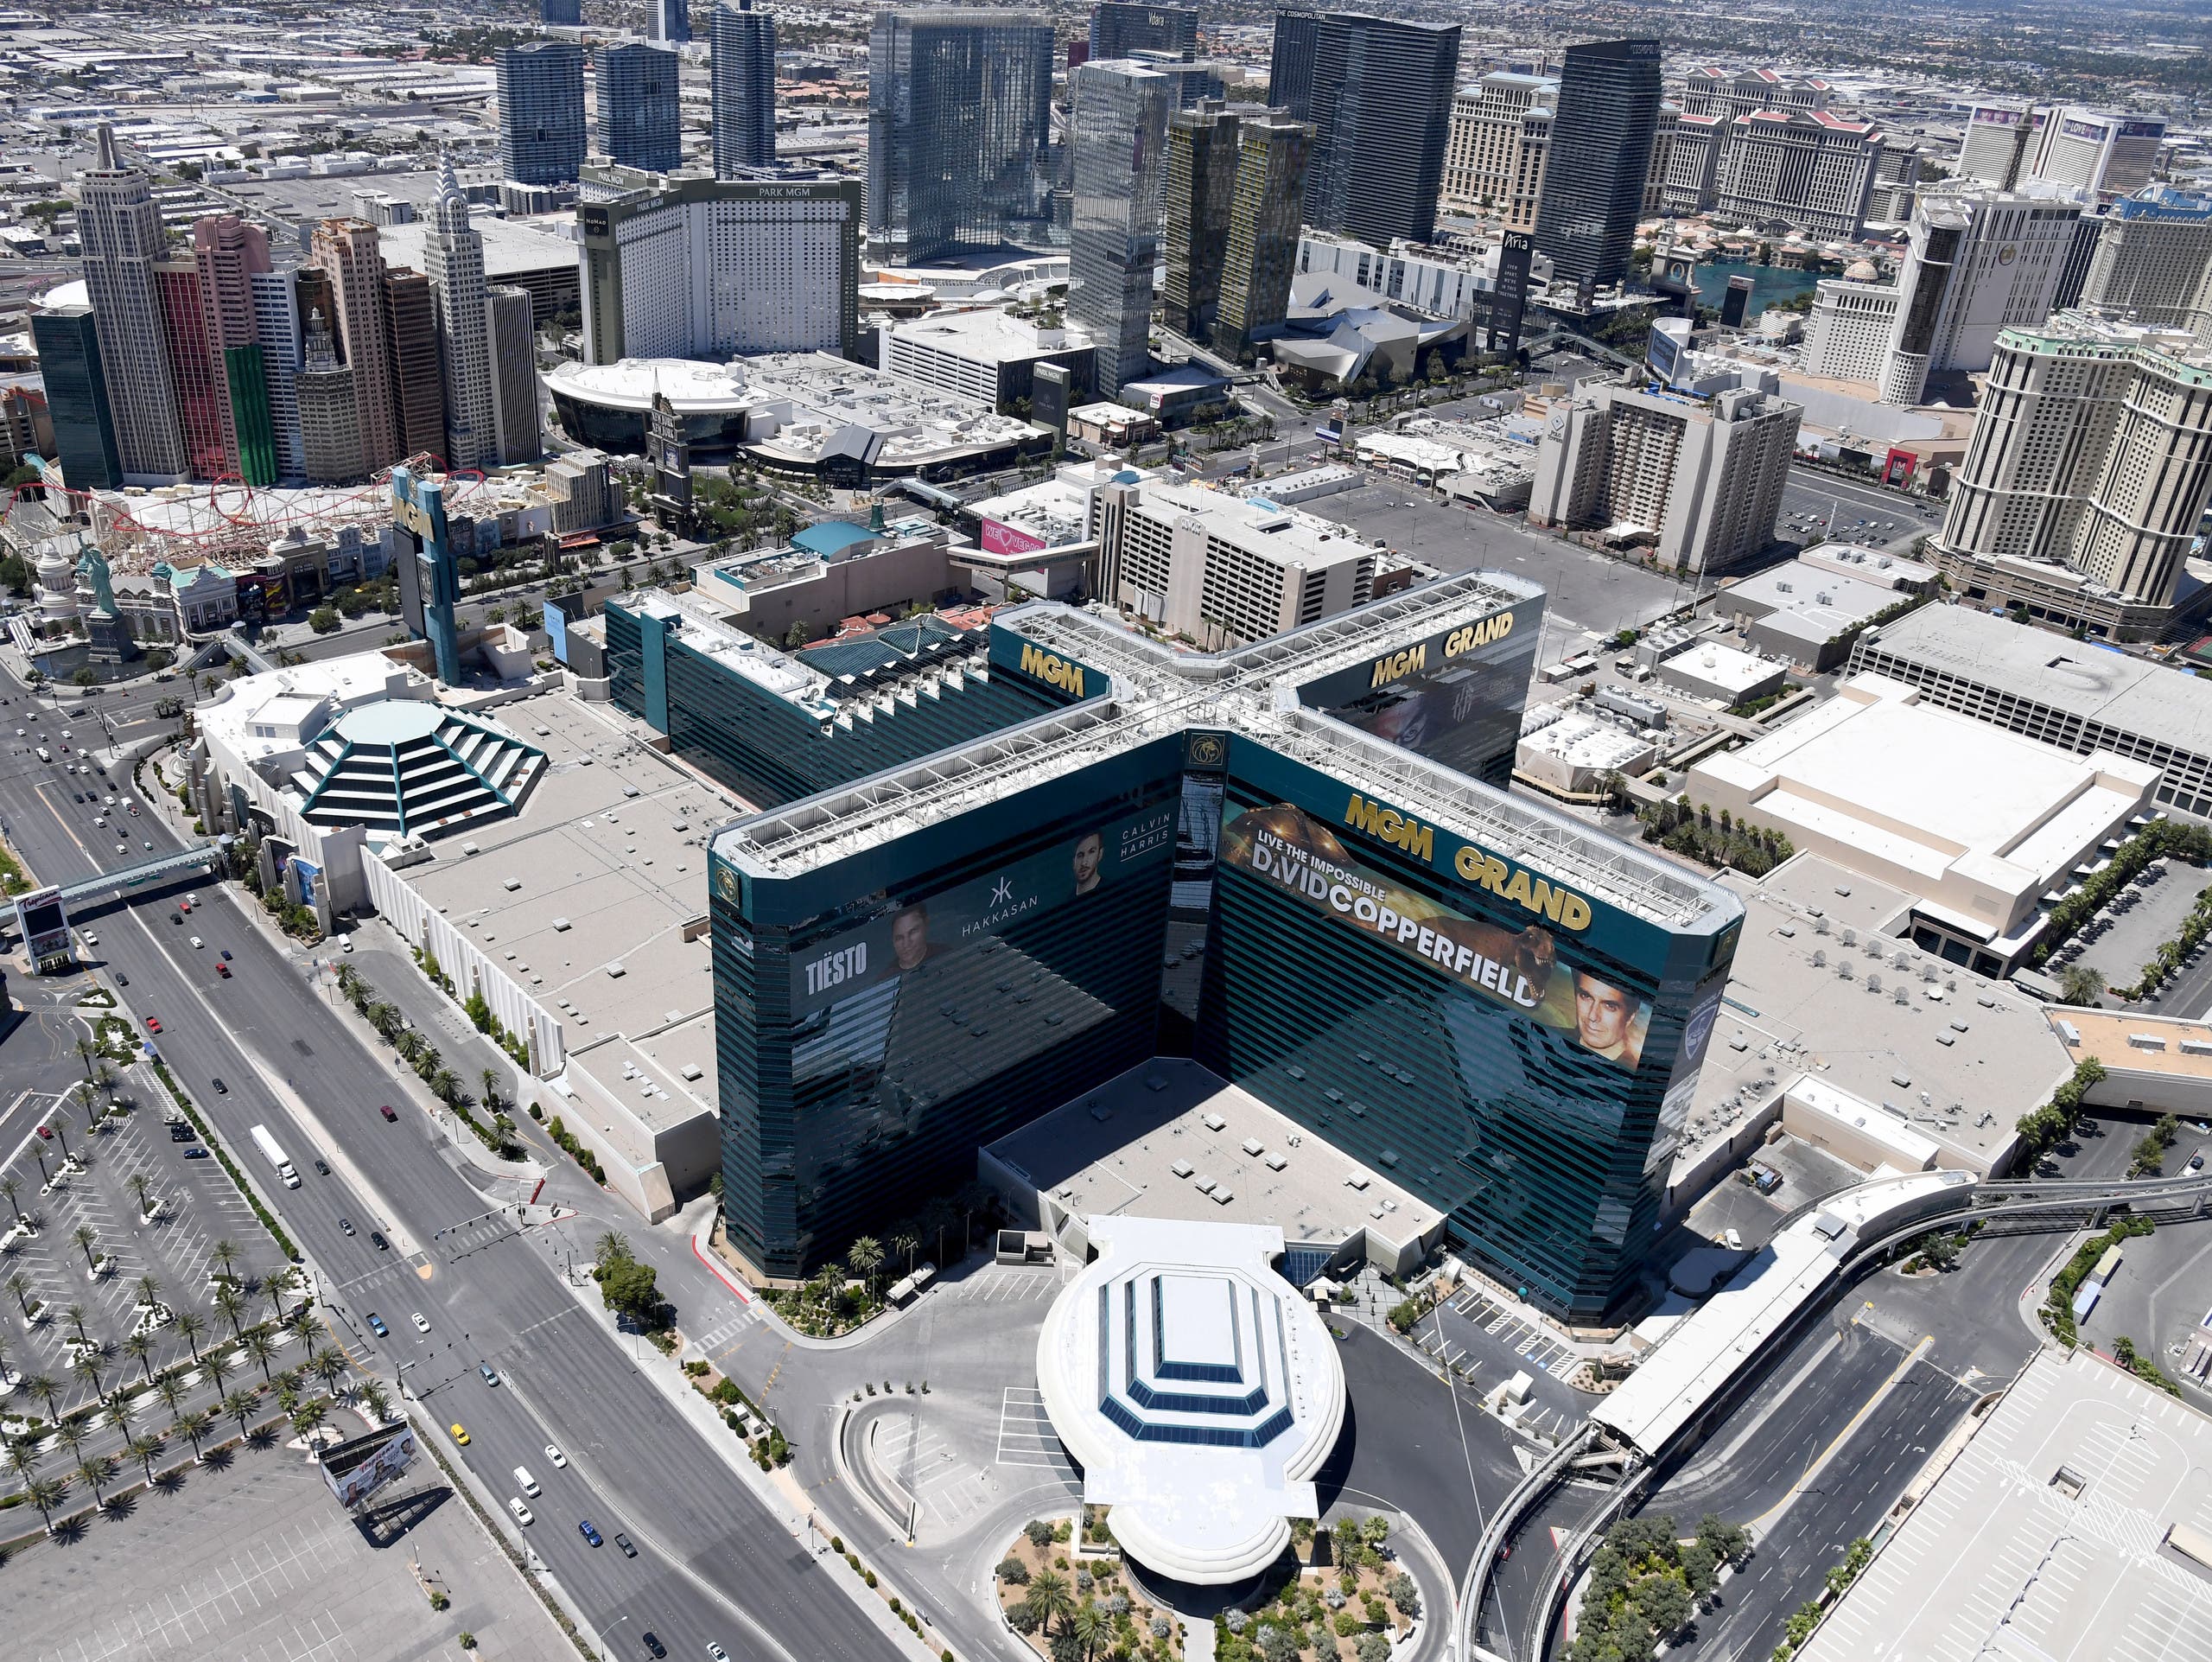 An aerial view shows the Las Vegas Strip including MGM Grand Hotel & Casino. (File photo: AFP)